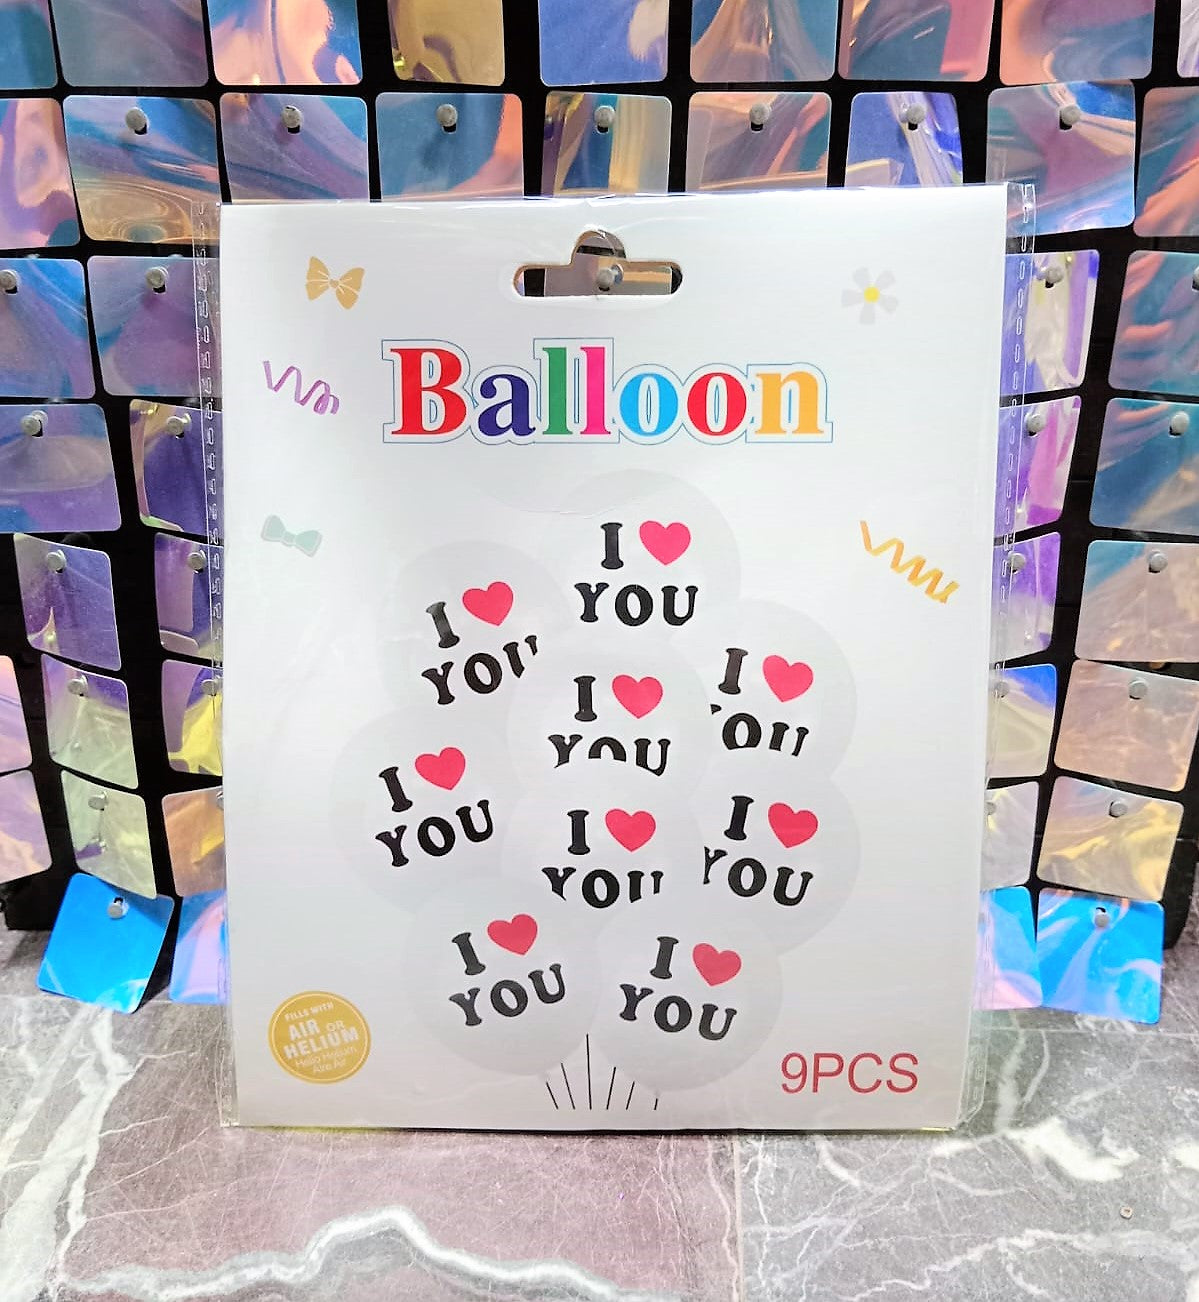 I Love You Printed White Latex Balloons For Birthday, Wedding, Anniversary & Valentine Party Decoration